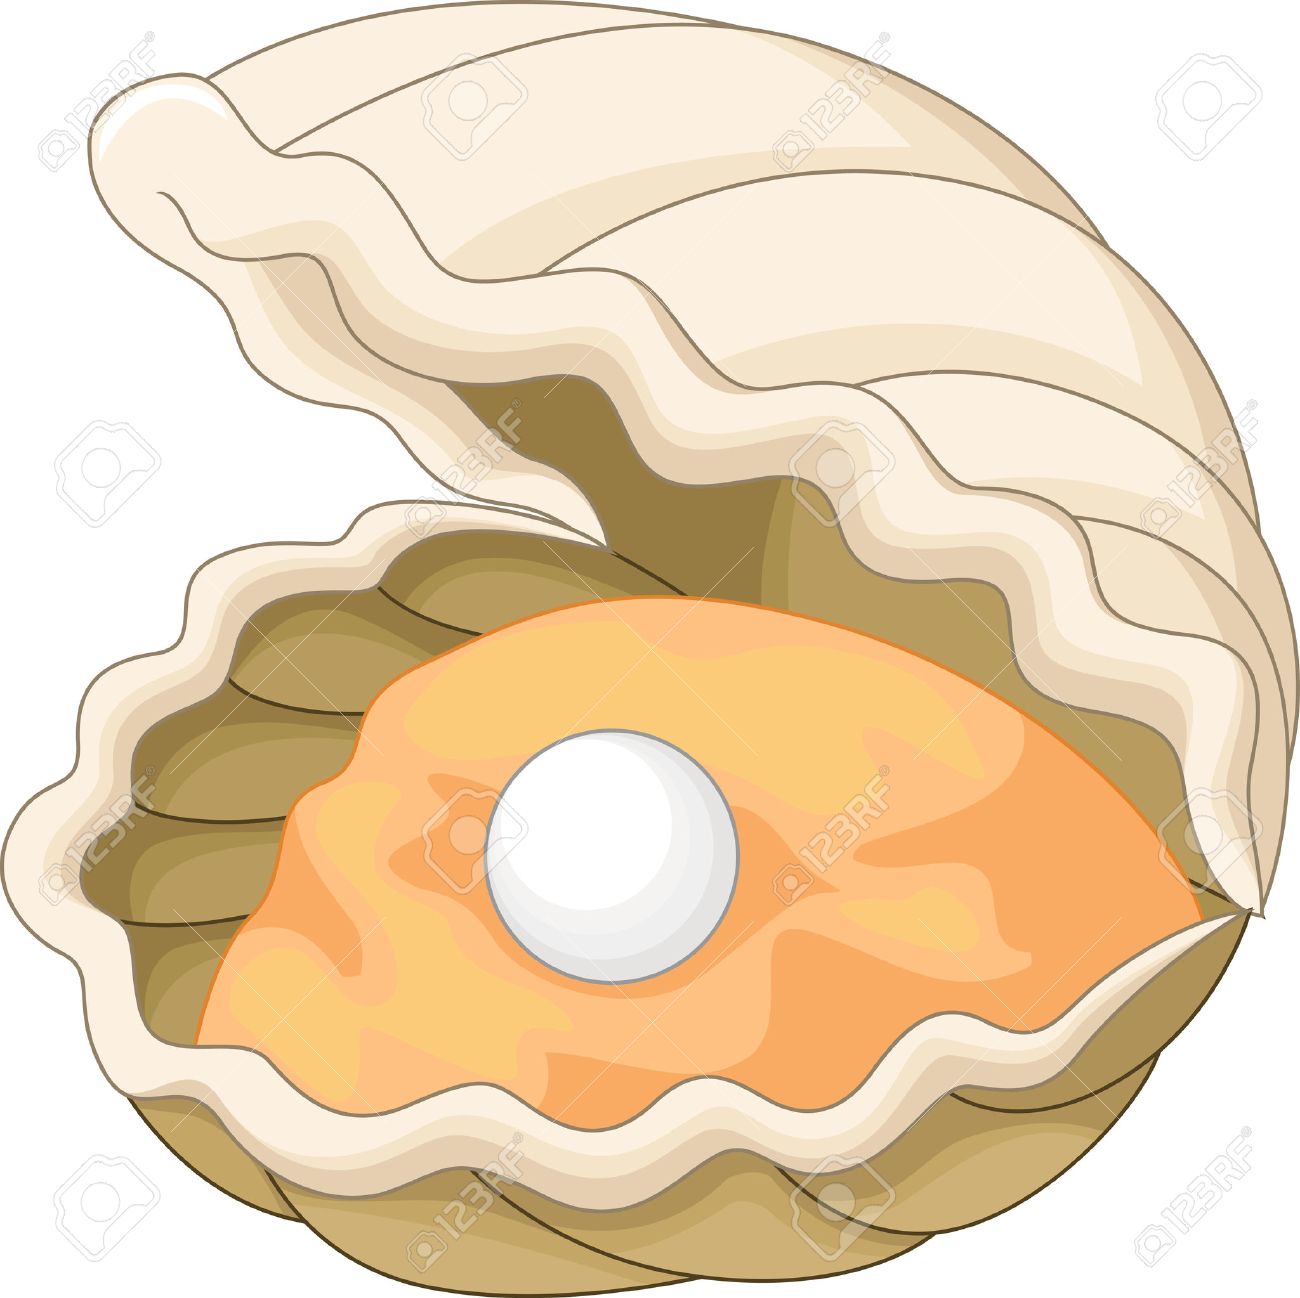 Cartoon Oyster with a pearl.